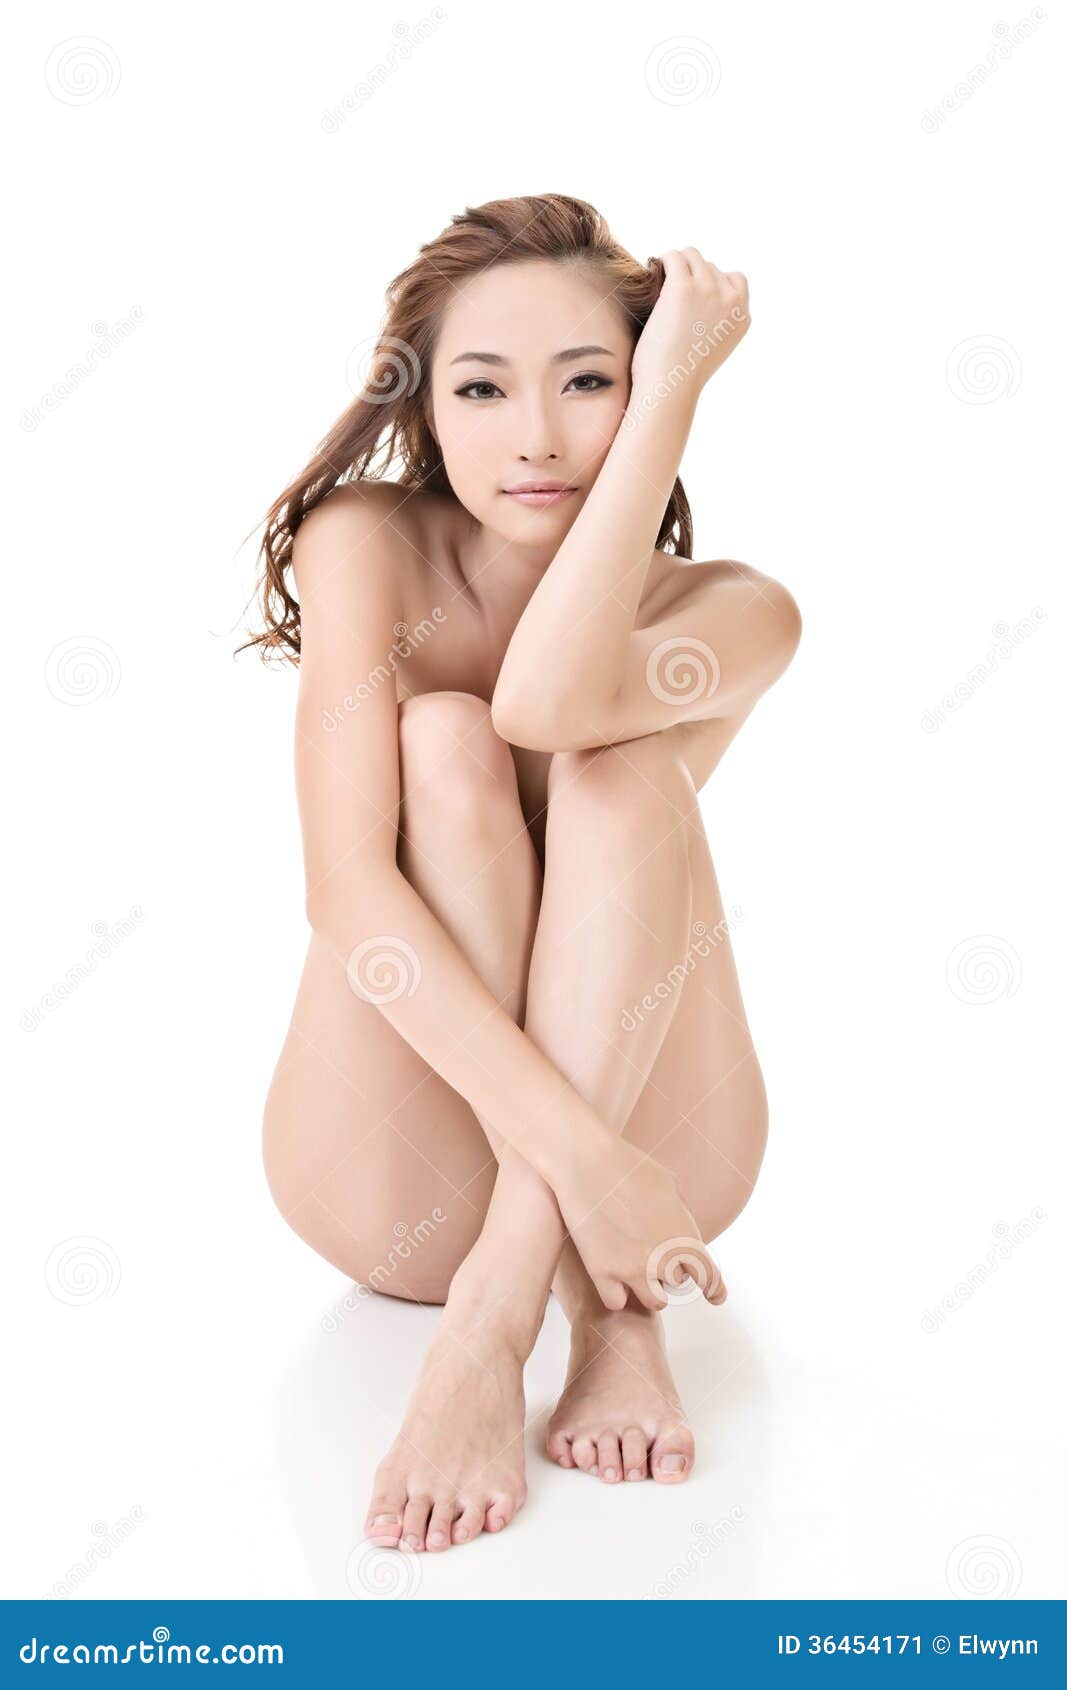 Nude woman of Asian stock image picture